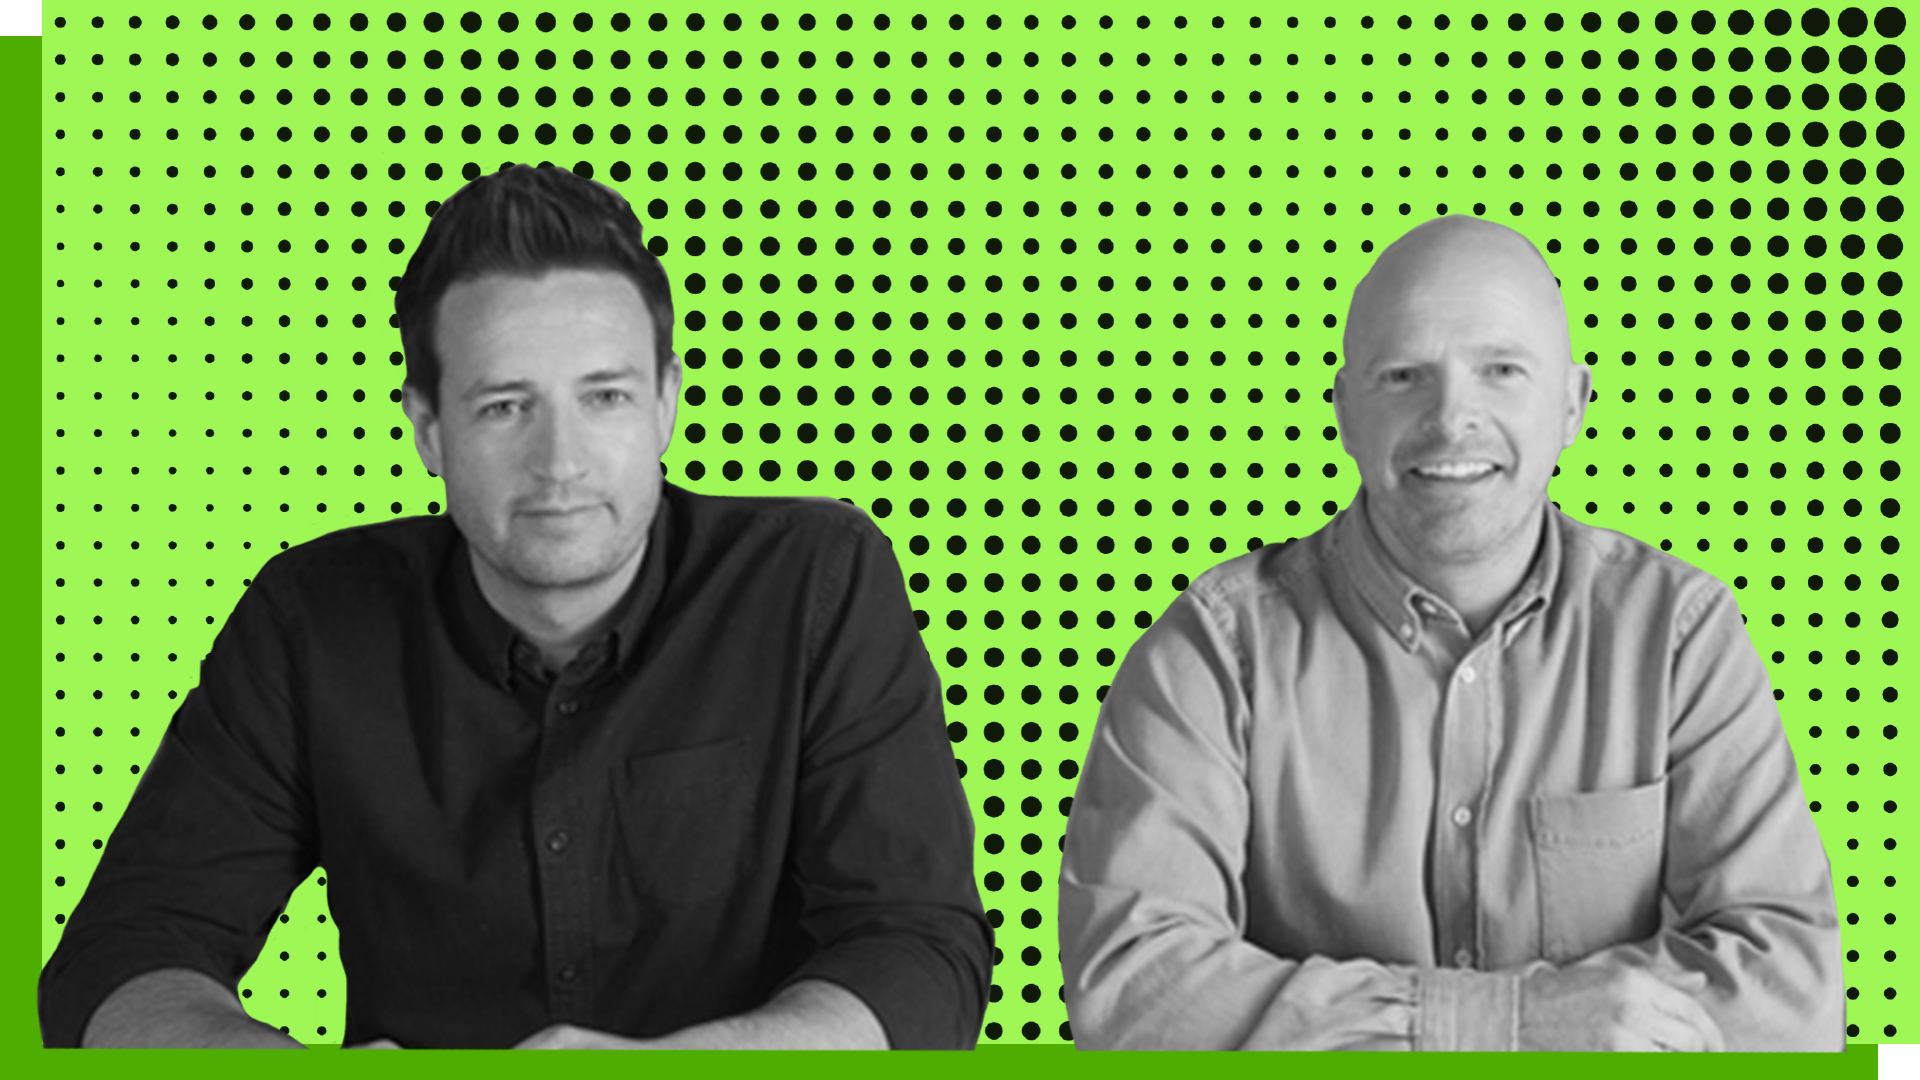 Adam&EveDDB’S Mike Sutherland and Ant Nelson had a Year to Remember Across Multiple Campaigns